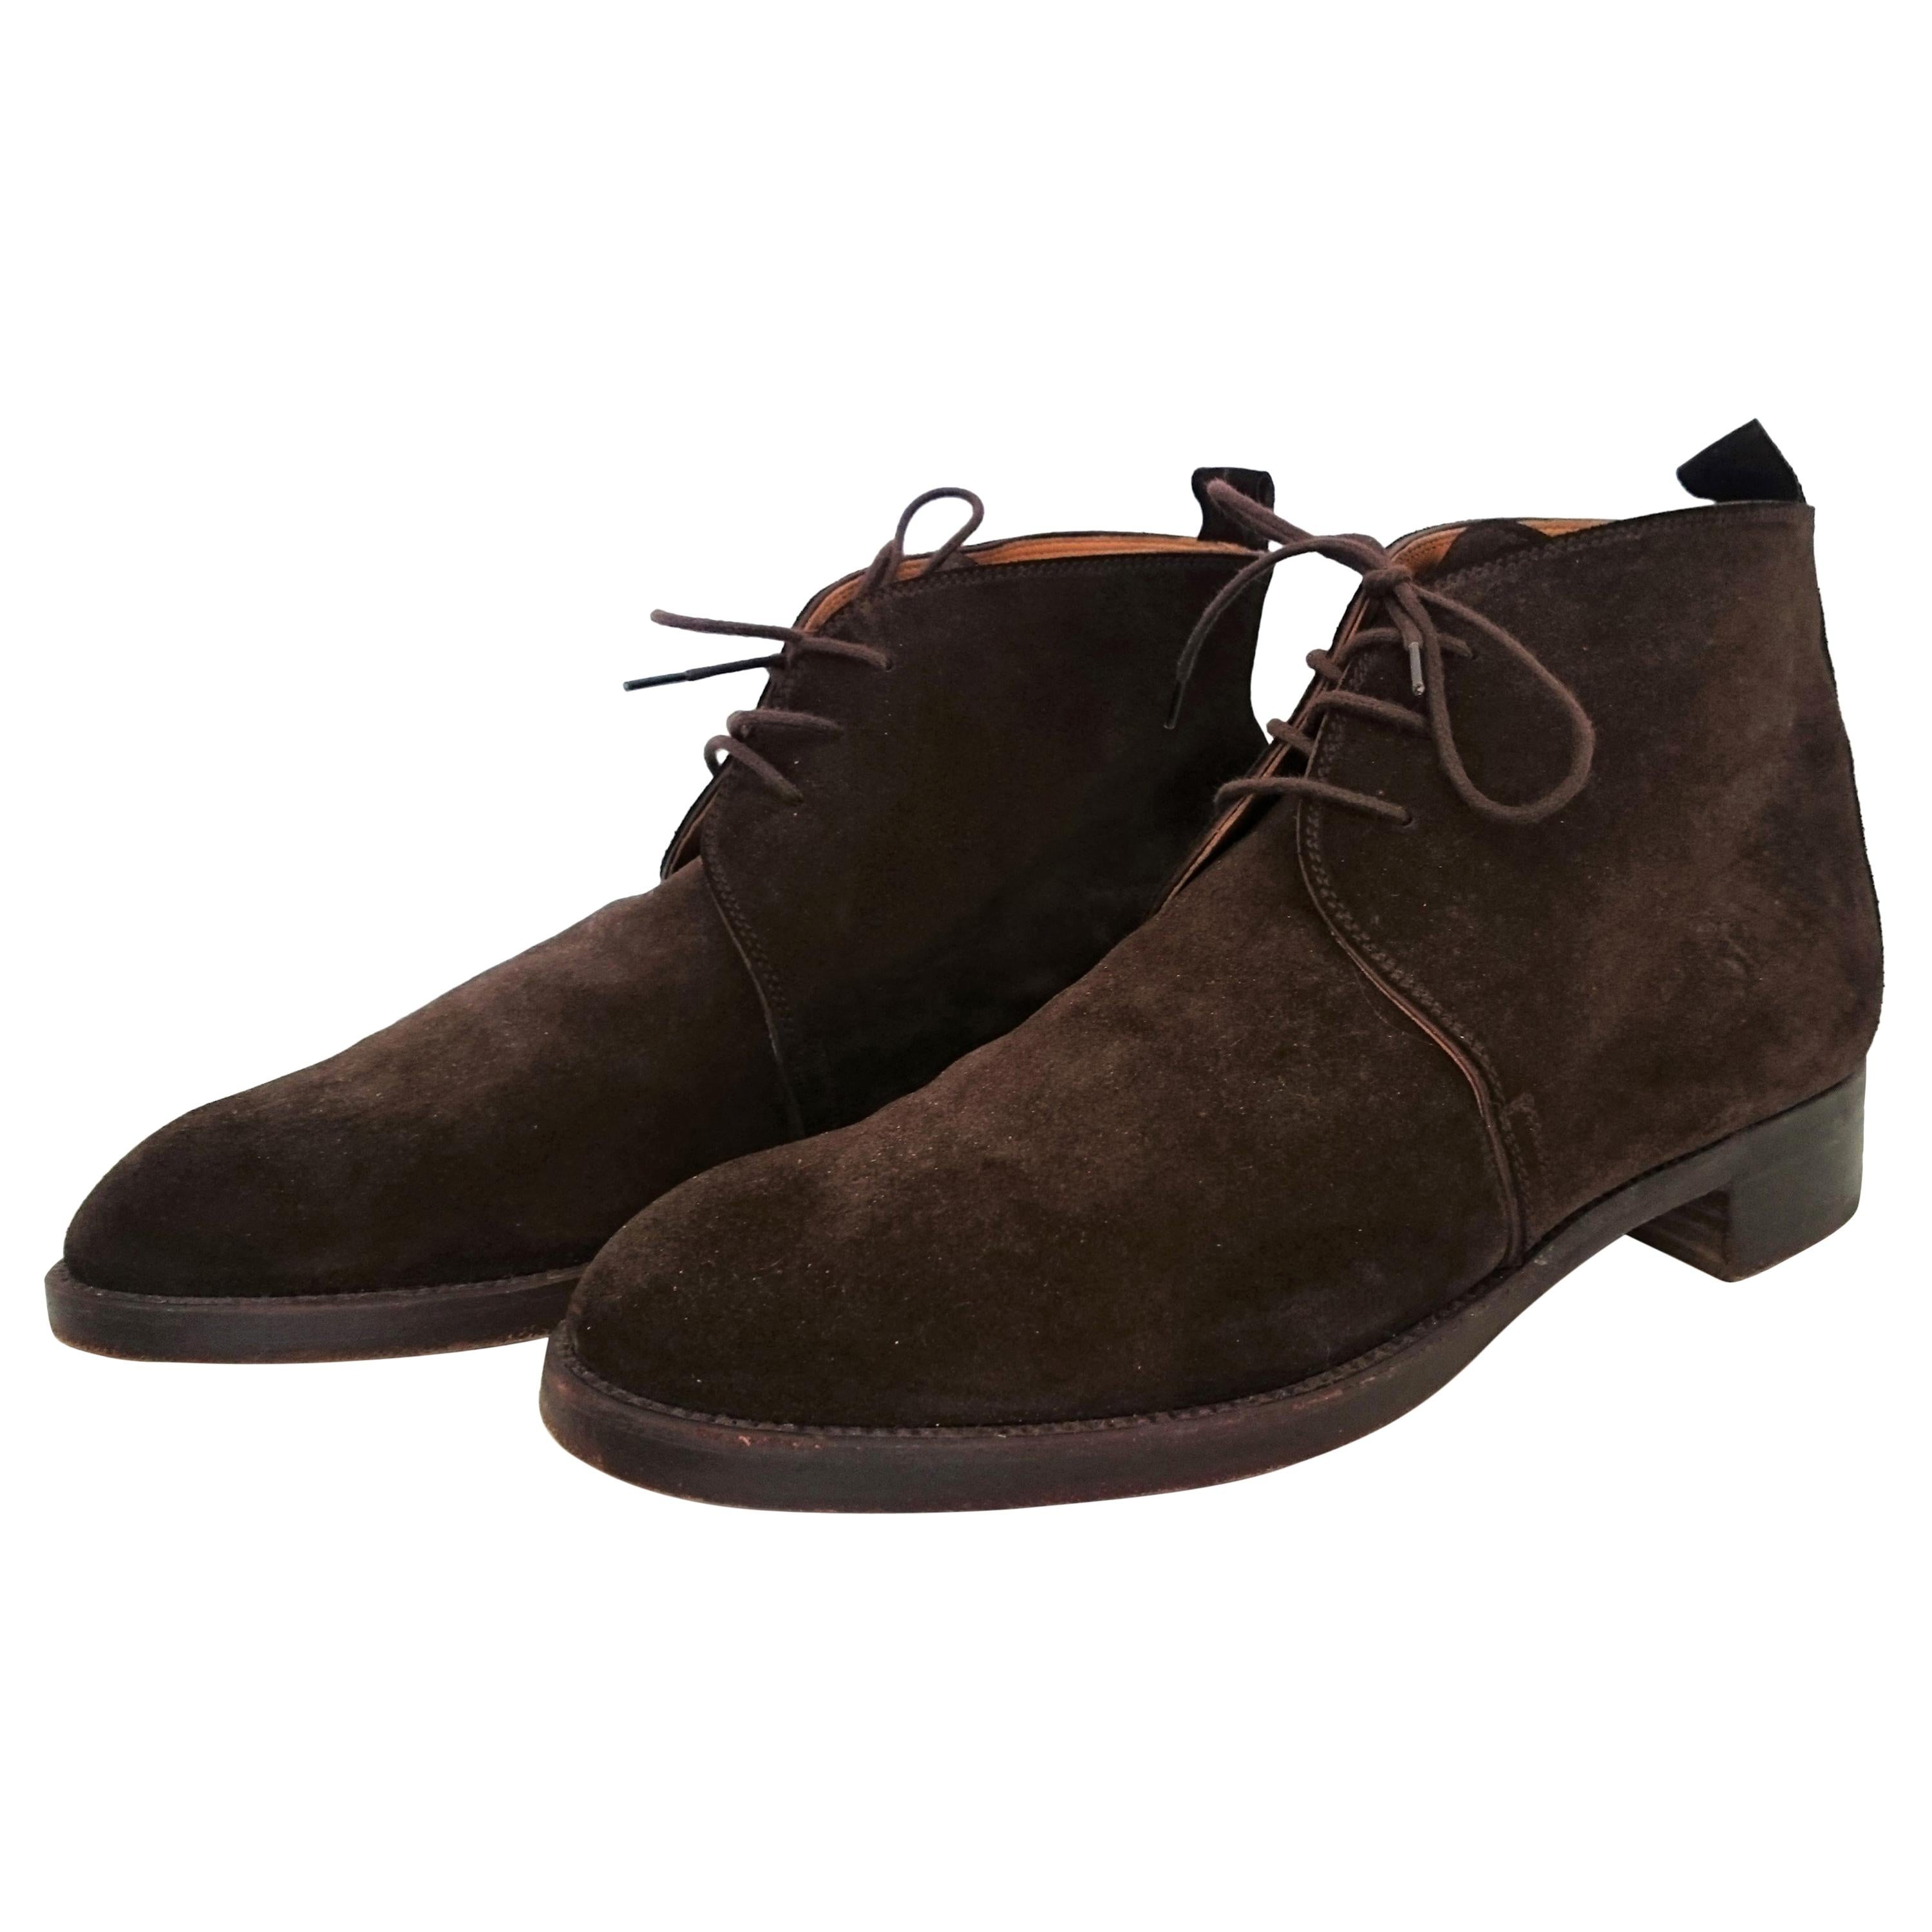 Hermès Brown Suede Ankle Boots. Size 40 For Sale at 1stDibs